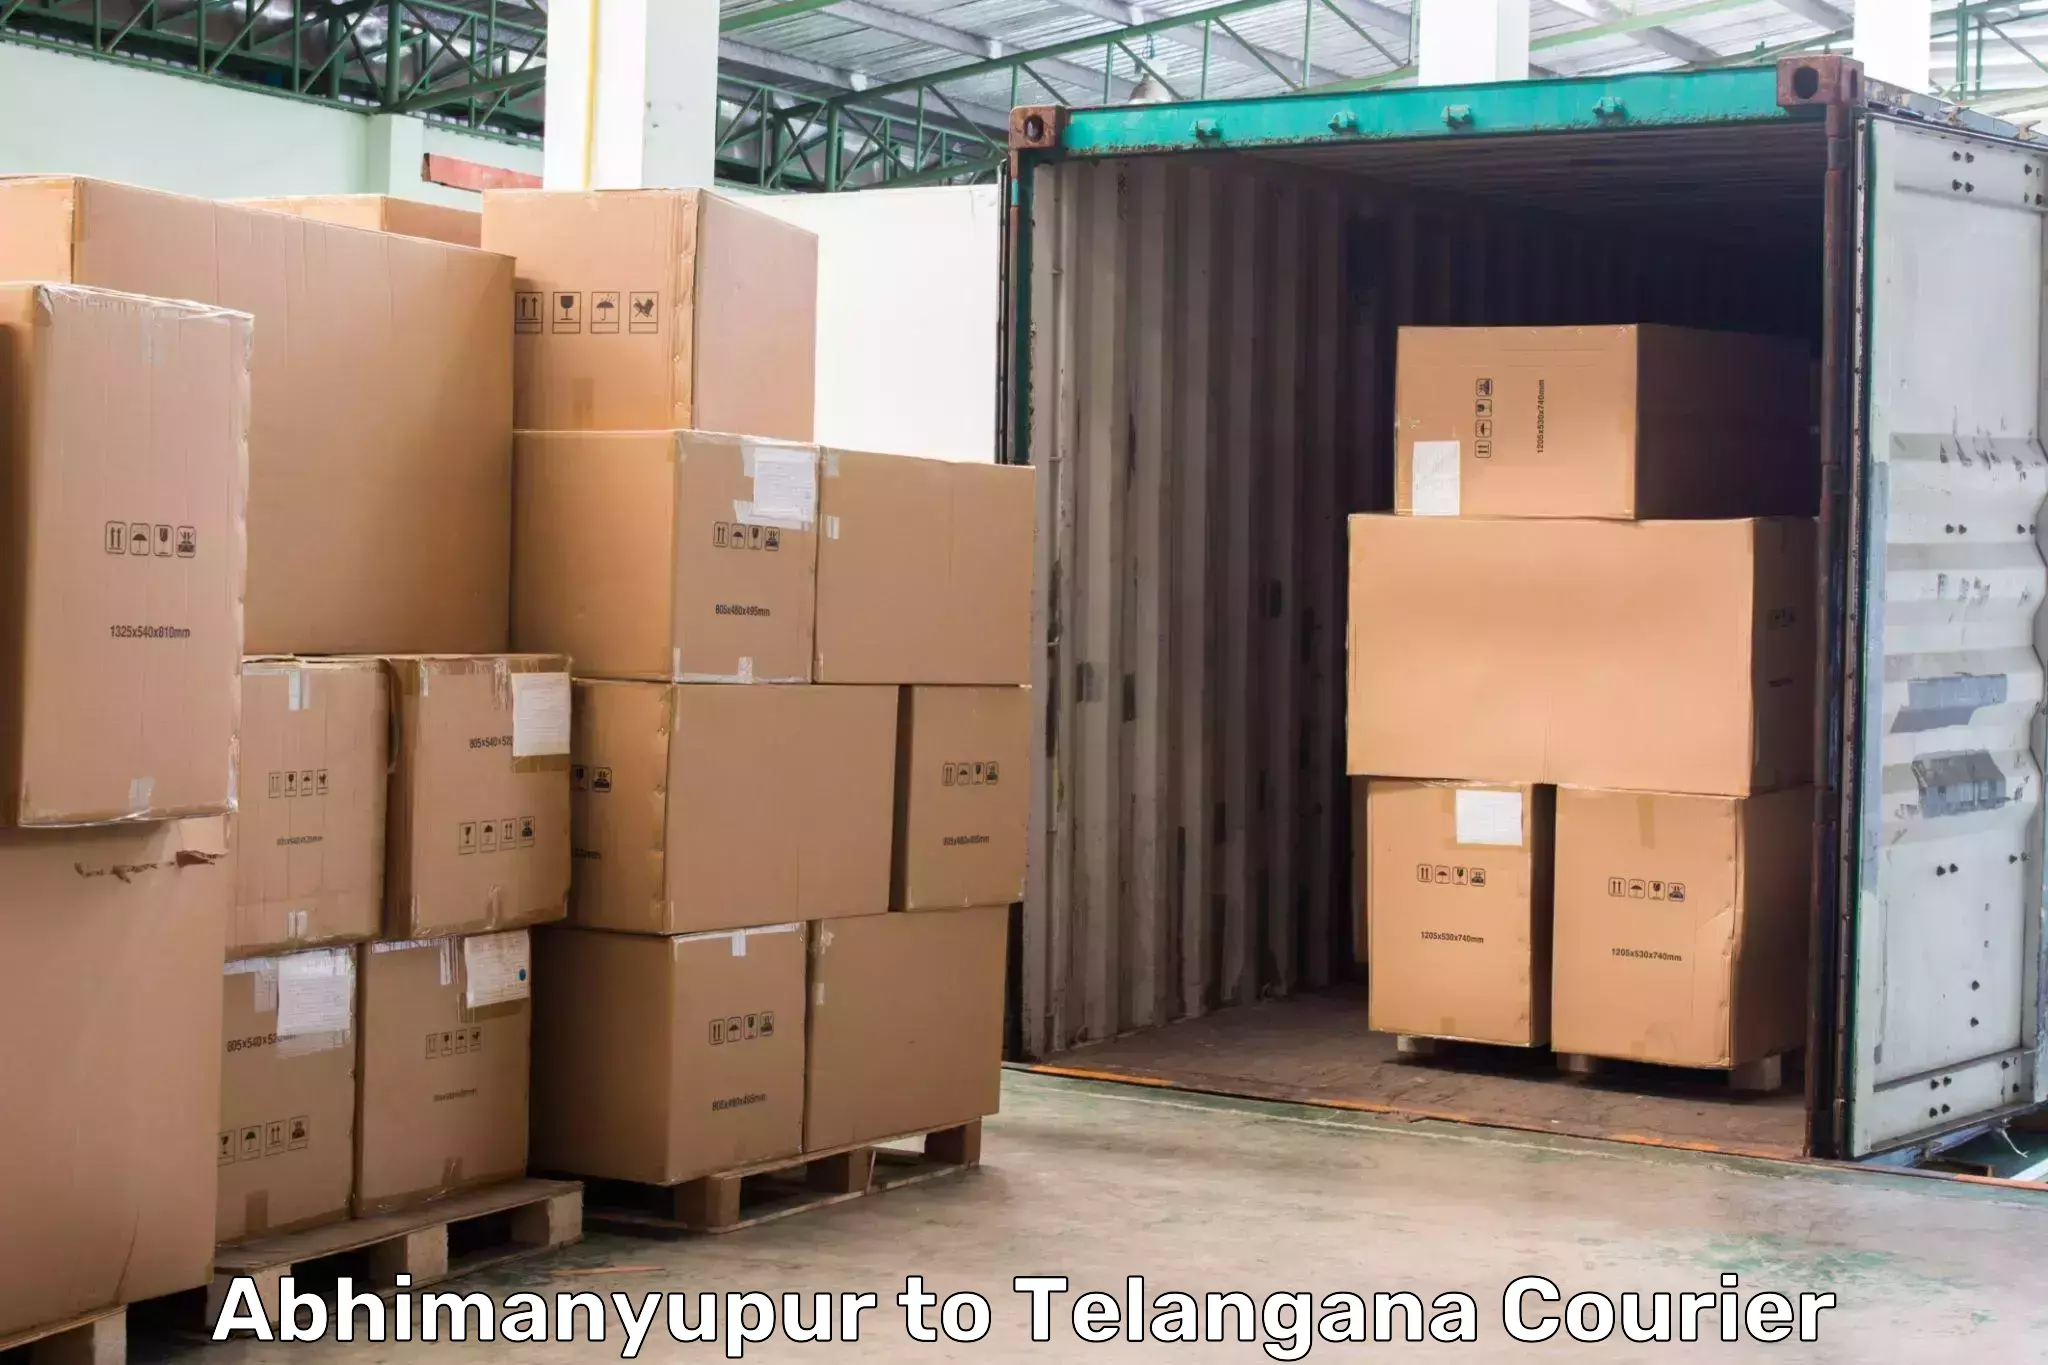 Parcel handling and care Abhimanyupur to Narayanpet